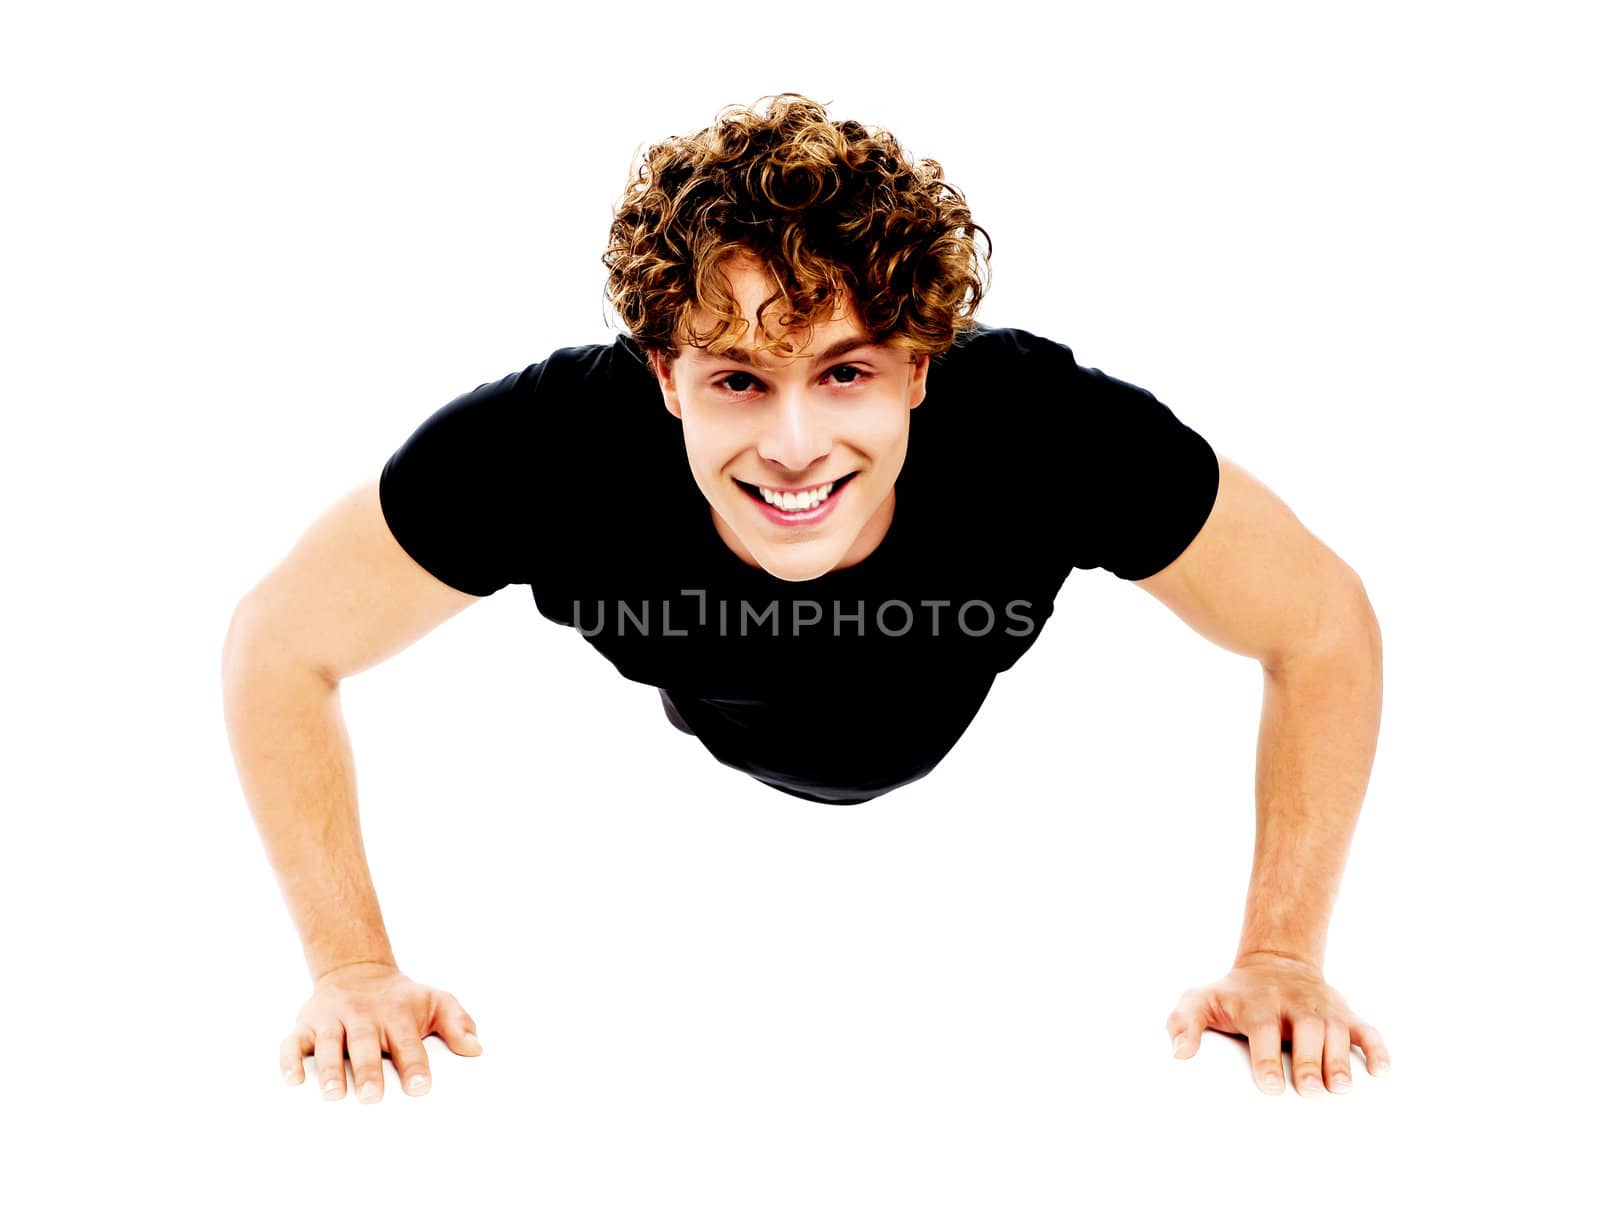 Healthy young guy doing push-ups exercise against white background